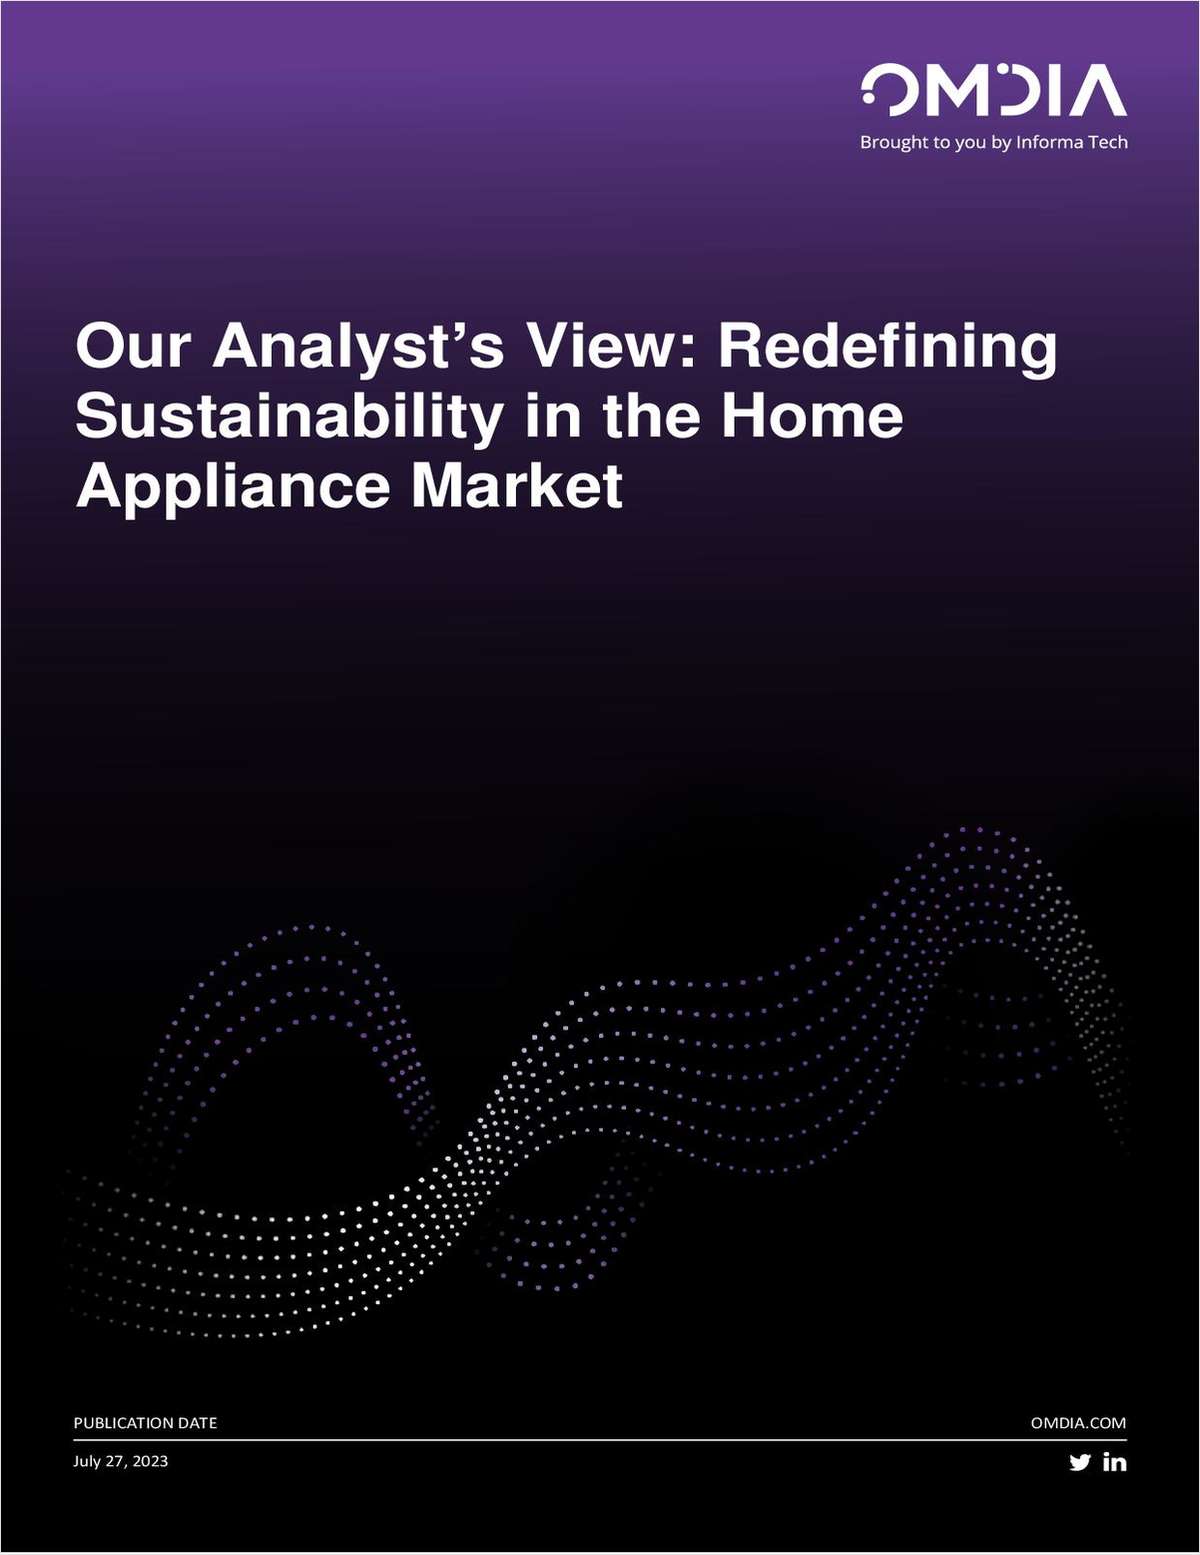 Our Analyst's View: Redefining Sustainability in the Home Appliance Market